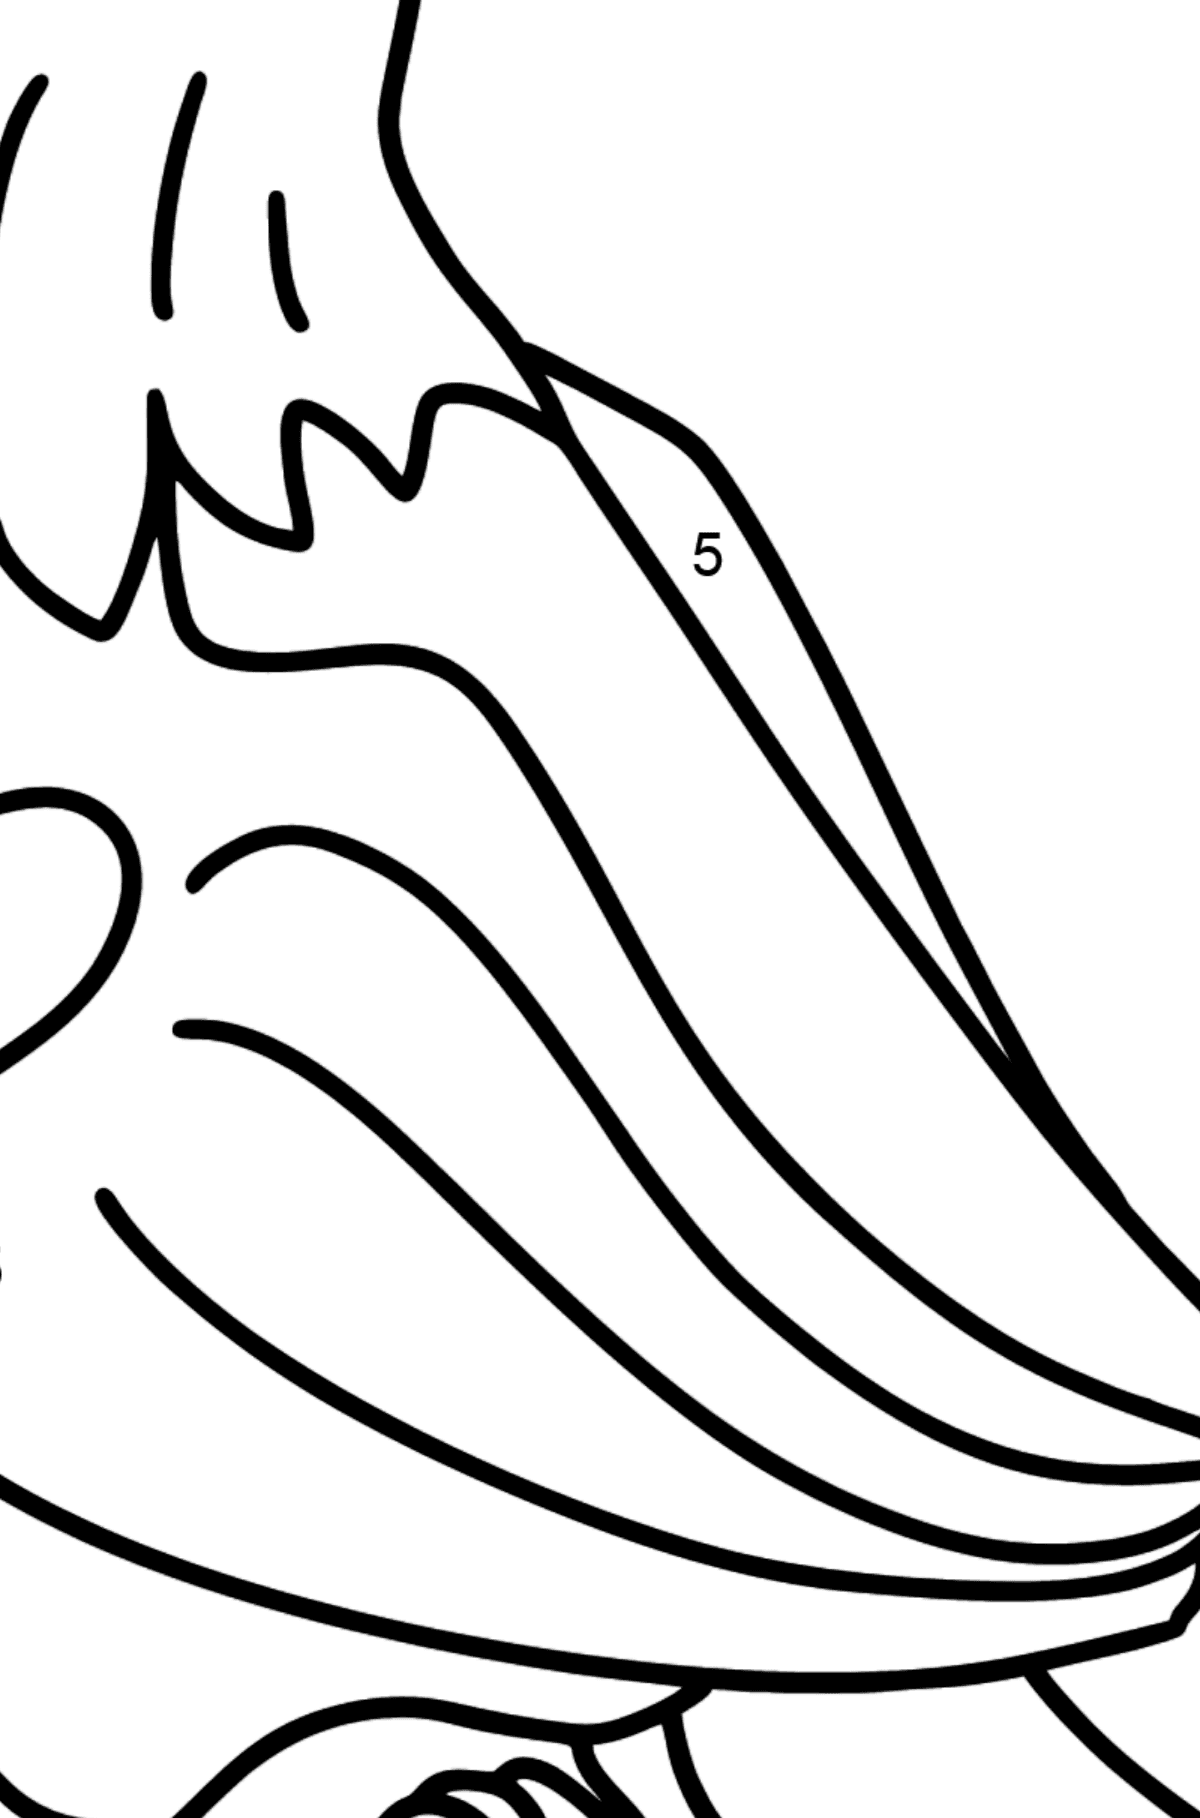 Hawk coloring page - Coloring by Numbers for Kids